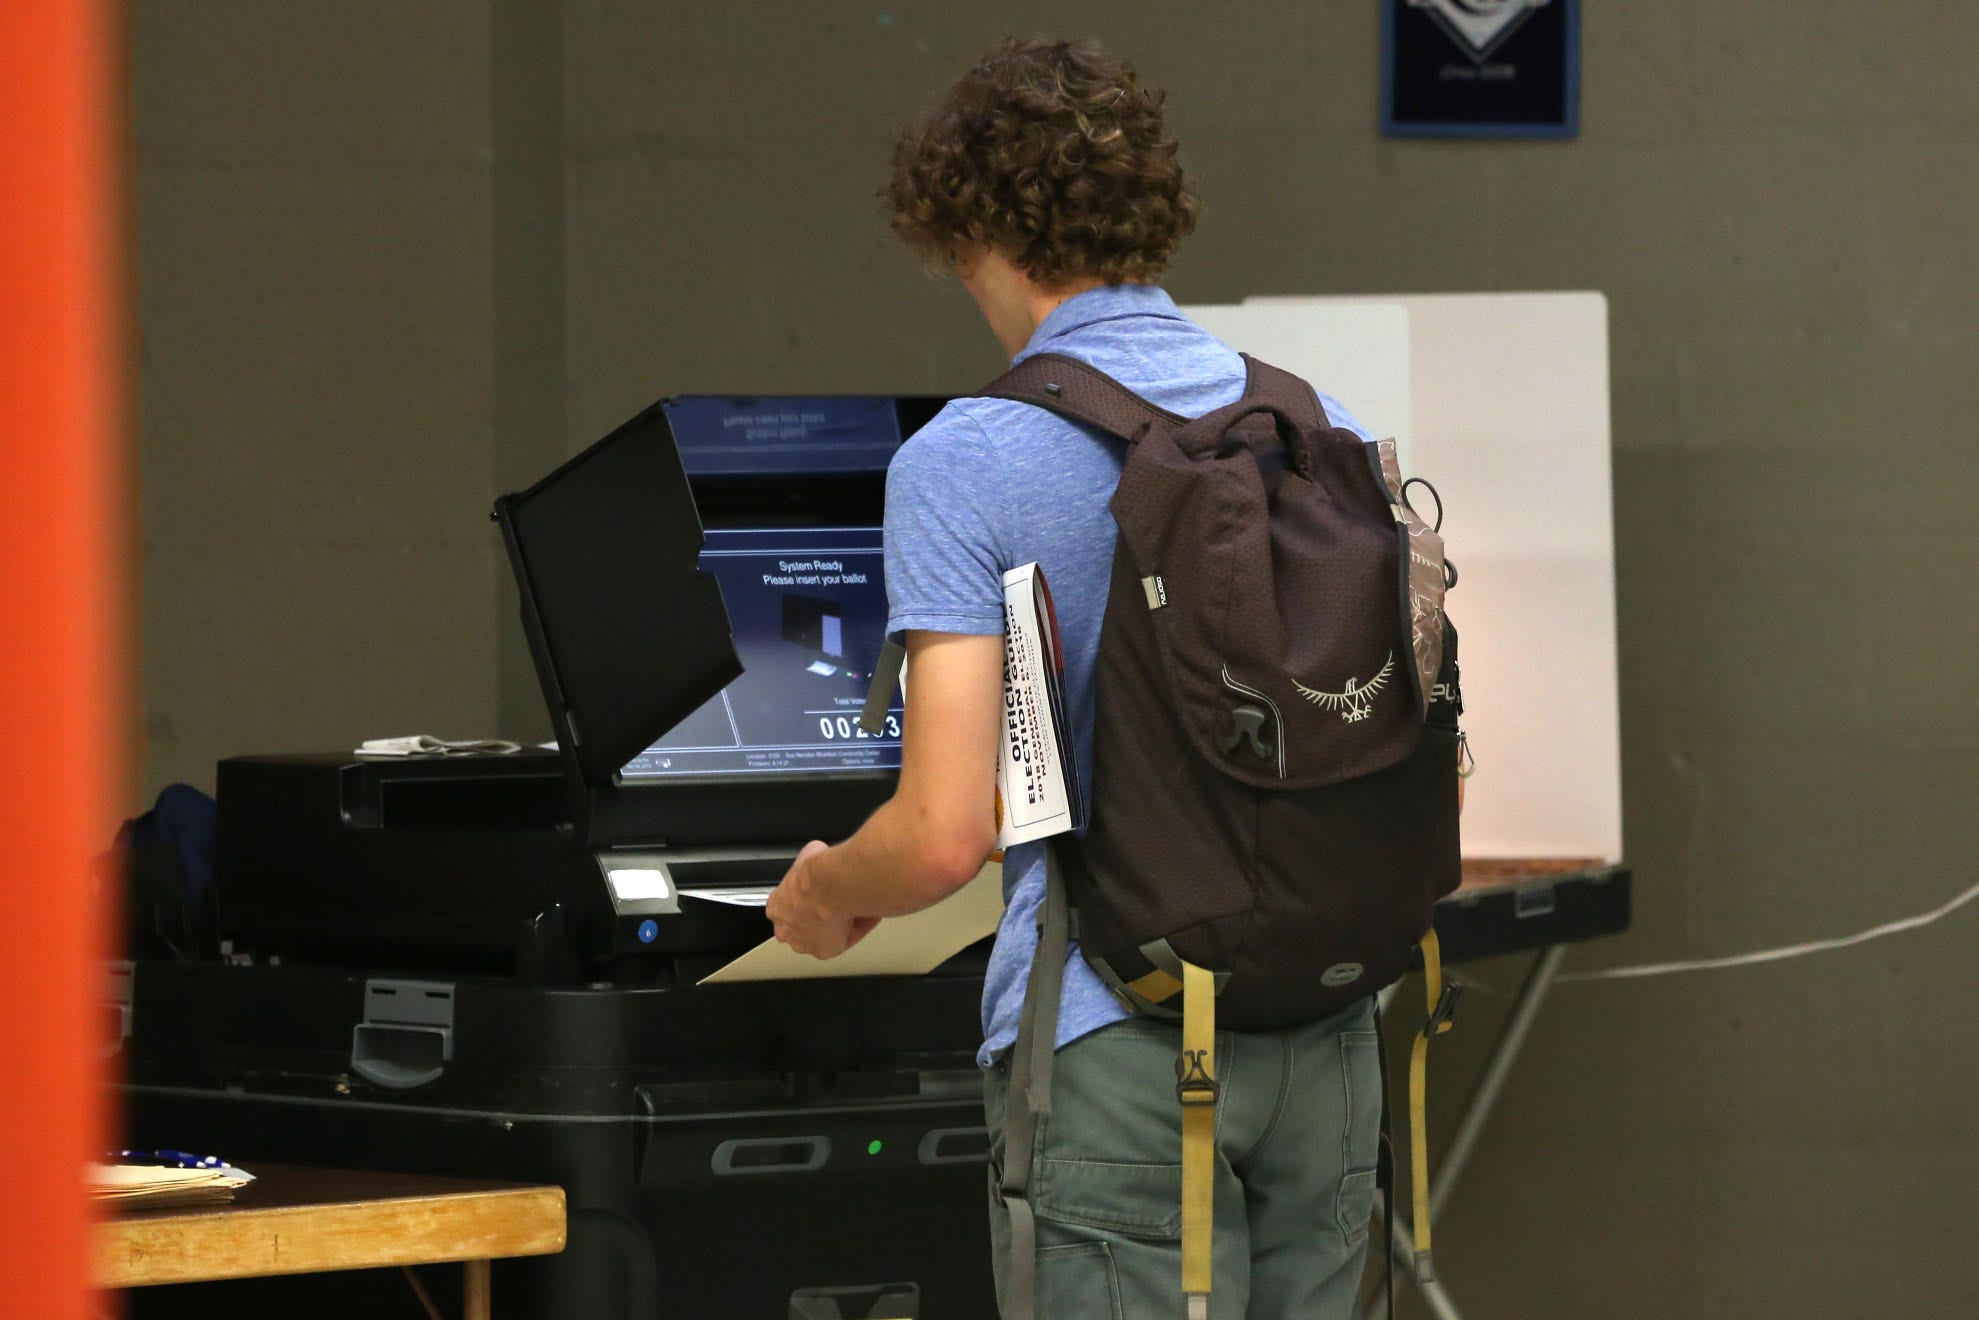 A voter casts his ballot at the Lafayette Community Center for the midterm elections on Election Day, Nov. 6, 2018.